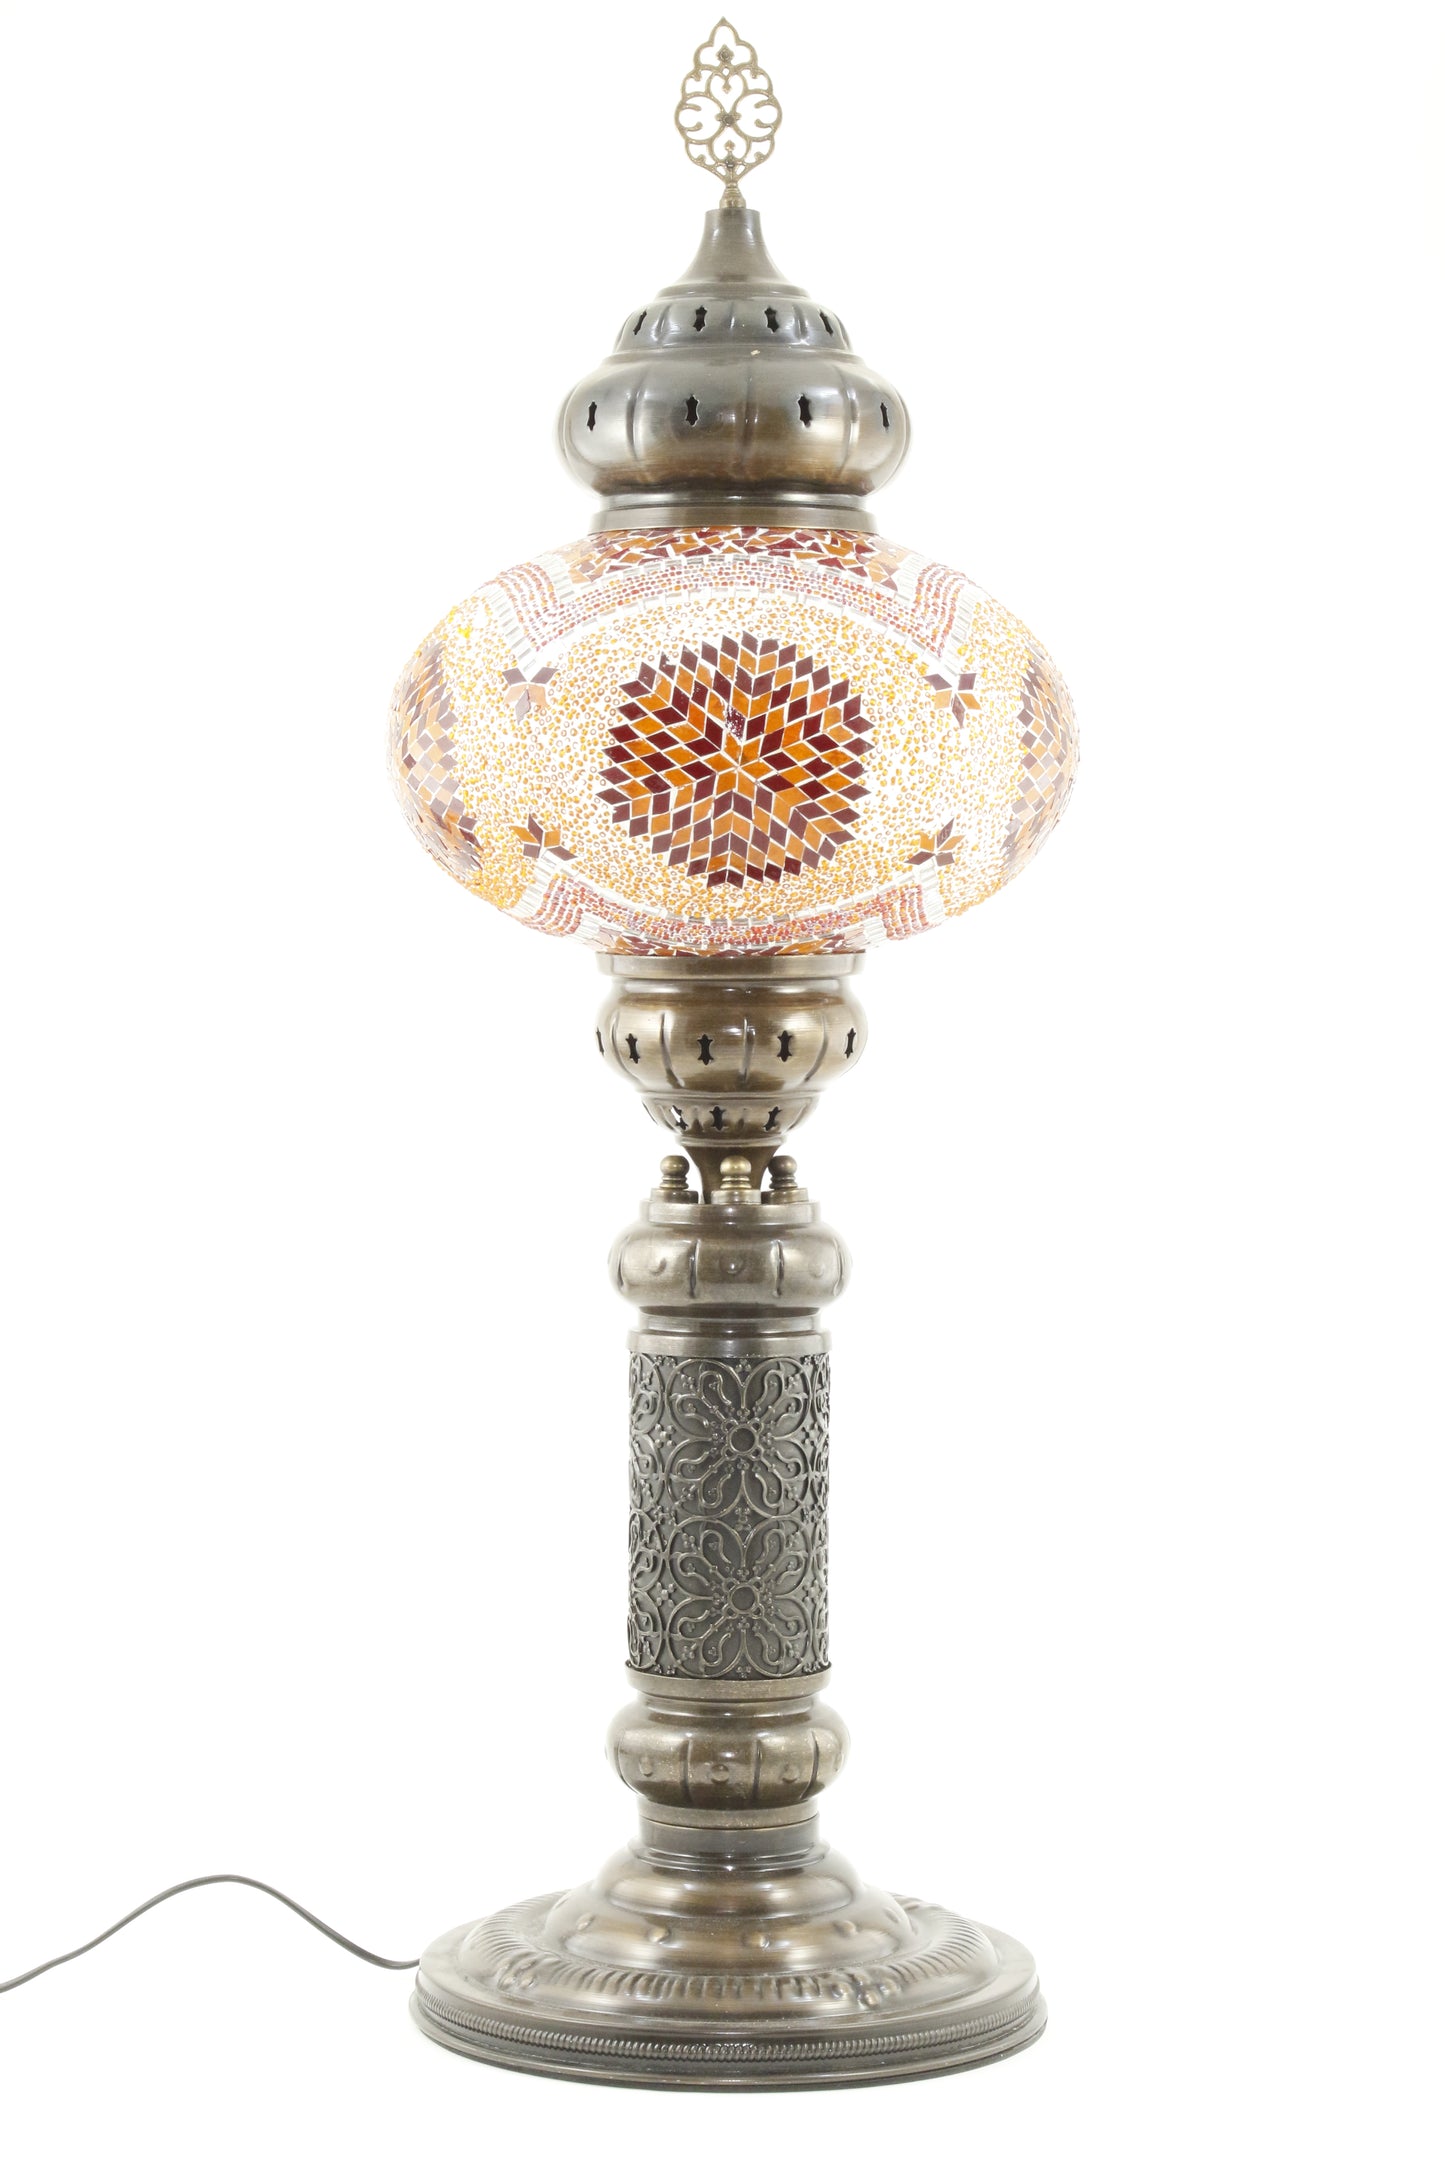 TURKISH MOSAIC GLASS TABLE LAMP MB5 -TURNED OFF